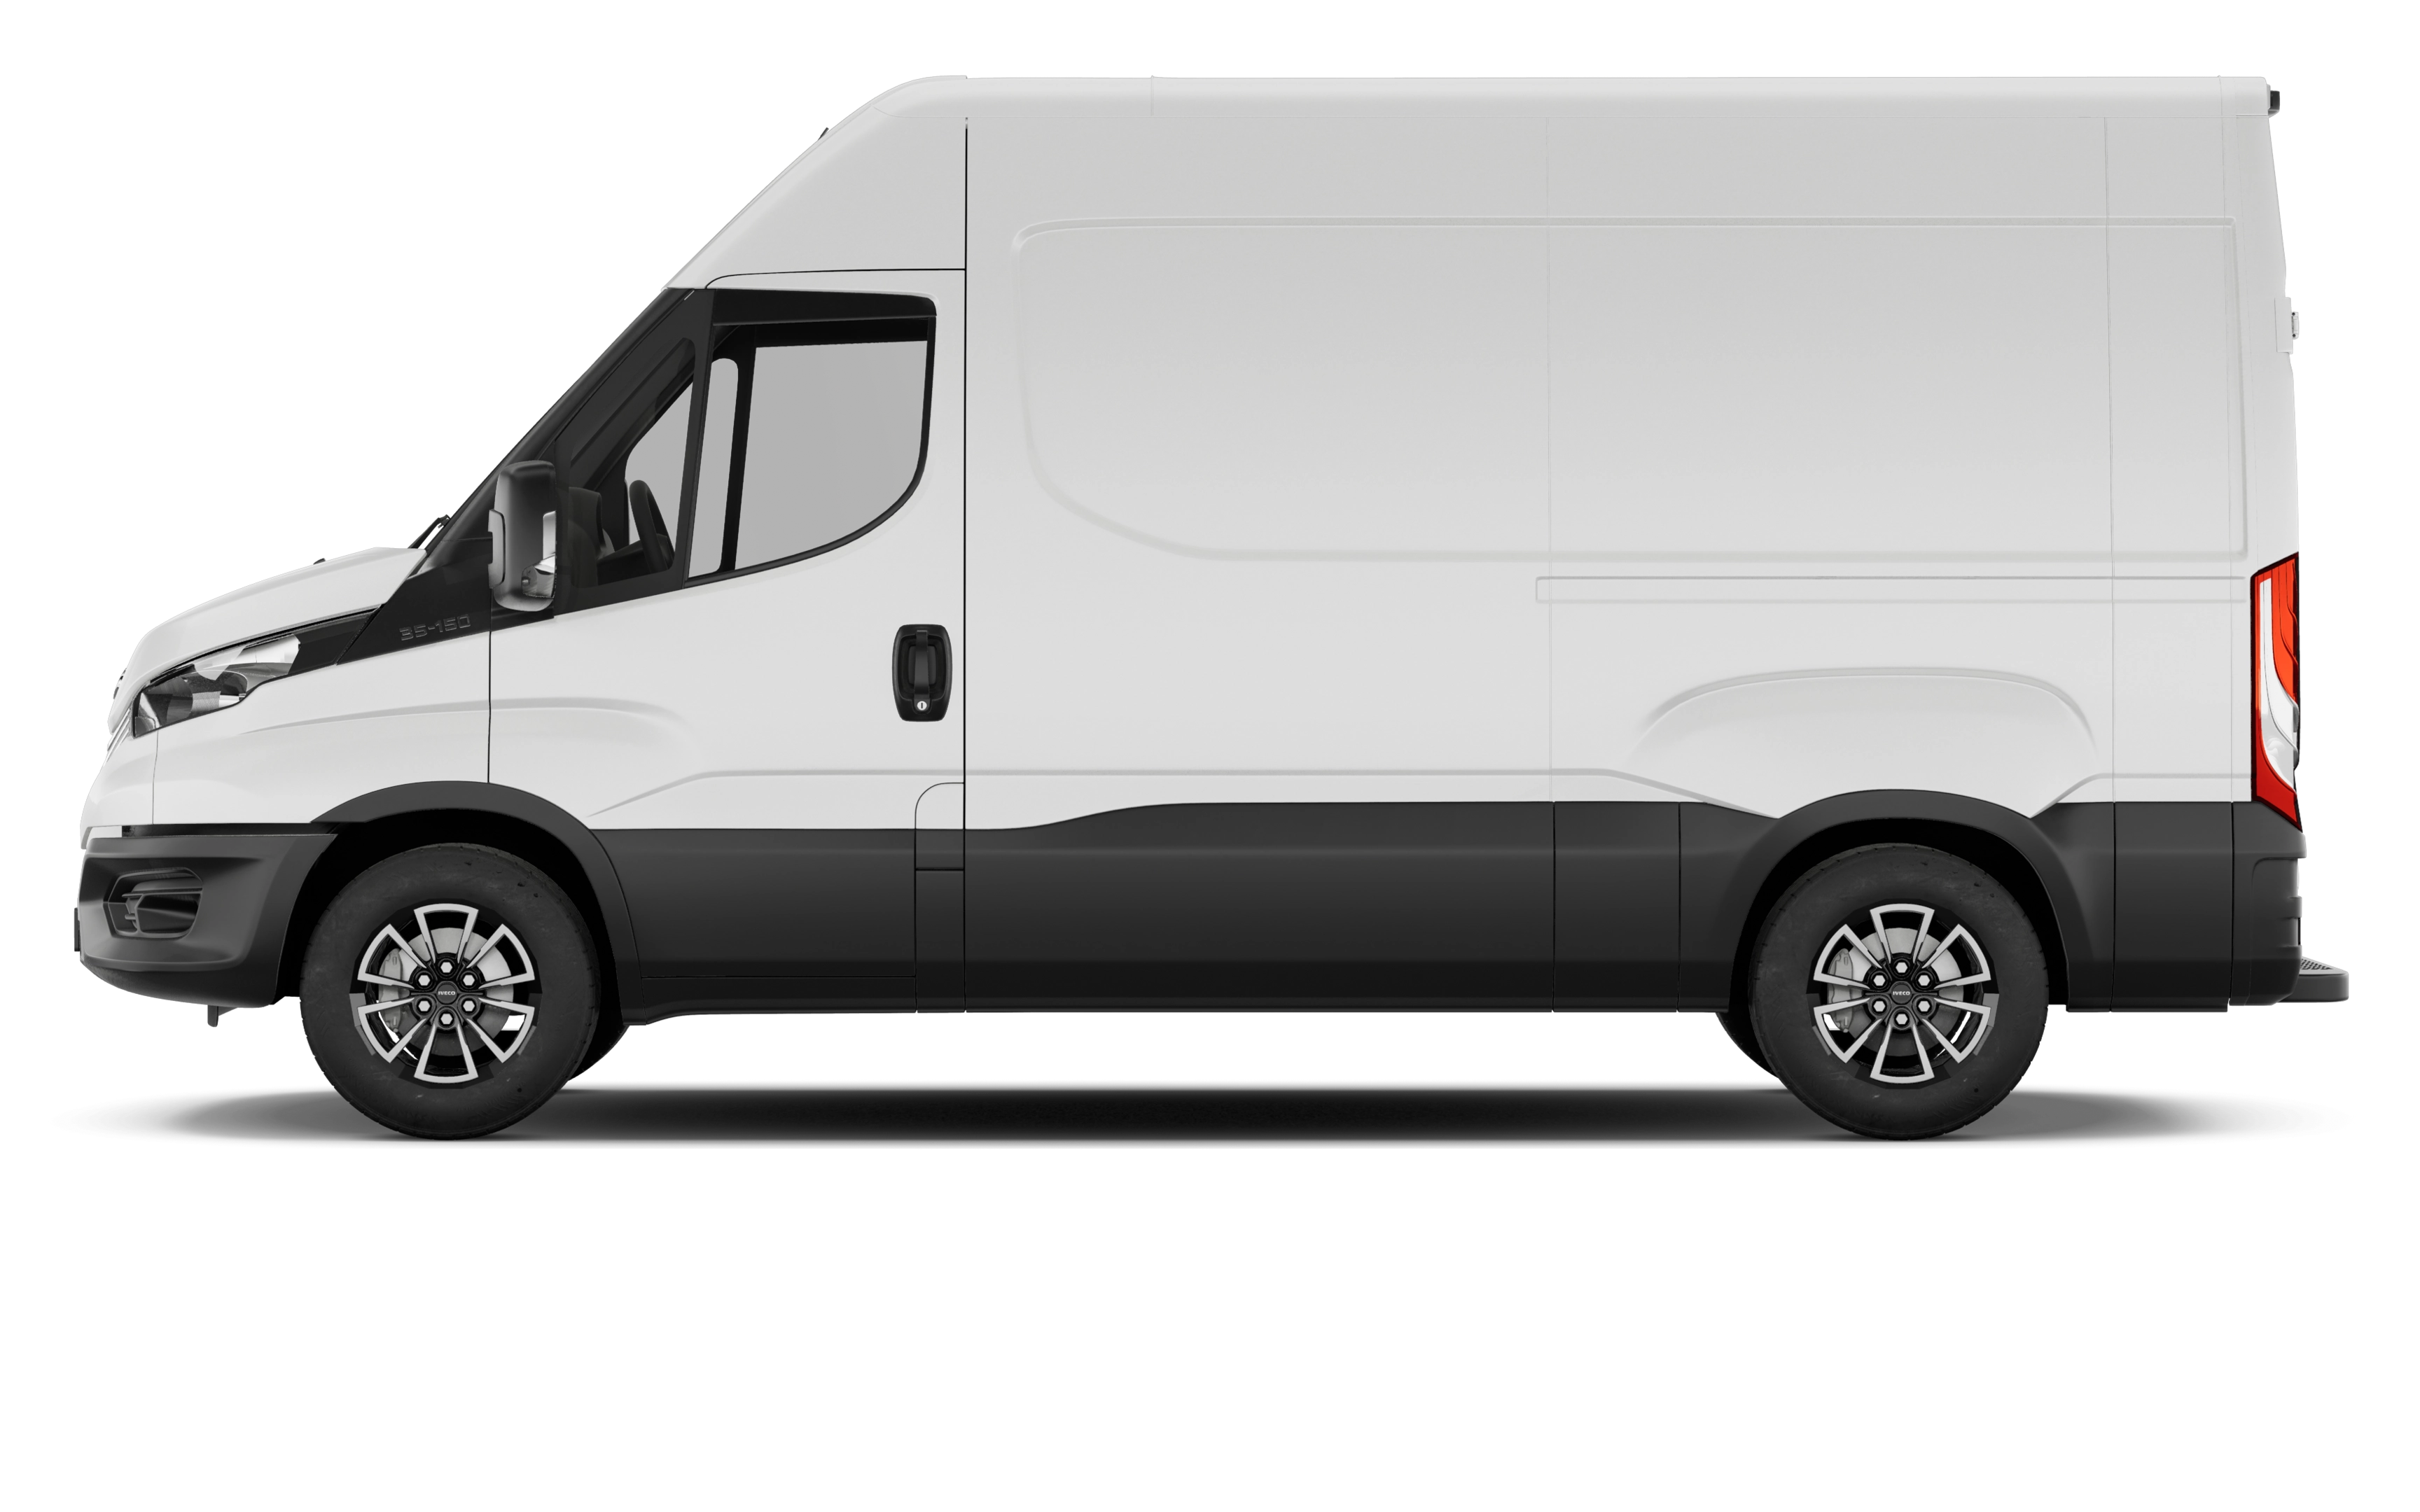 Iveco edaily 35s14 electric 140kw 74kwh high roof van 3520l wb auto [22kw]